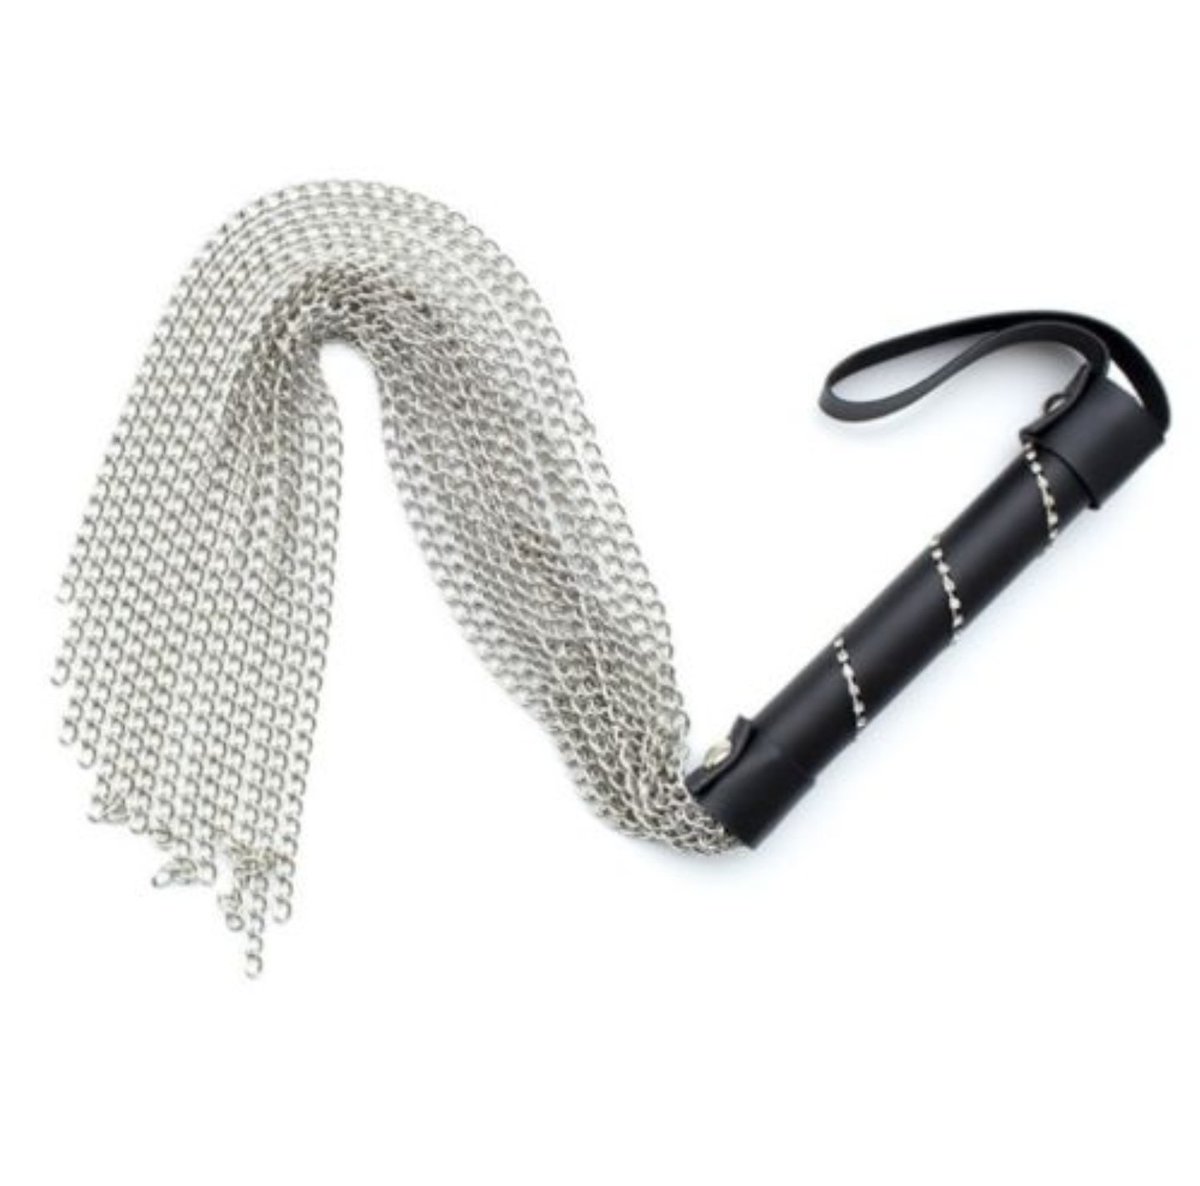 A good heavy thud and then the wave of pleasure after makes this metal chain flail is a must for any corporal punishment fan. Shipping quickly discreetly and cheaply worldwide from: dottyaftermidnight.co.uk